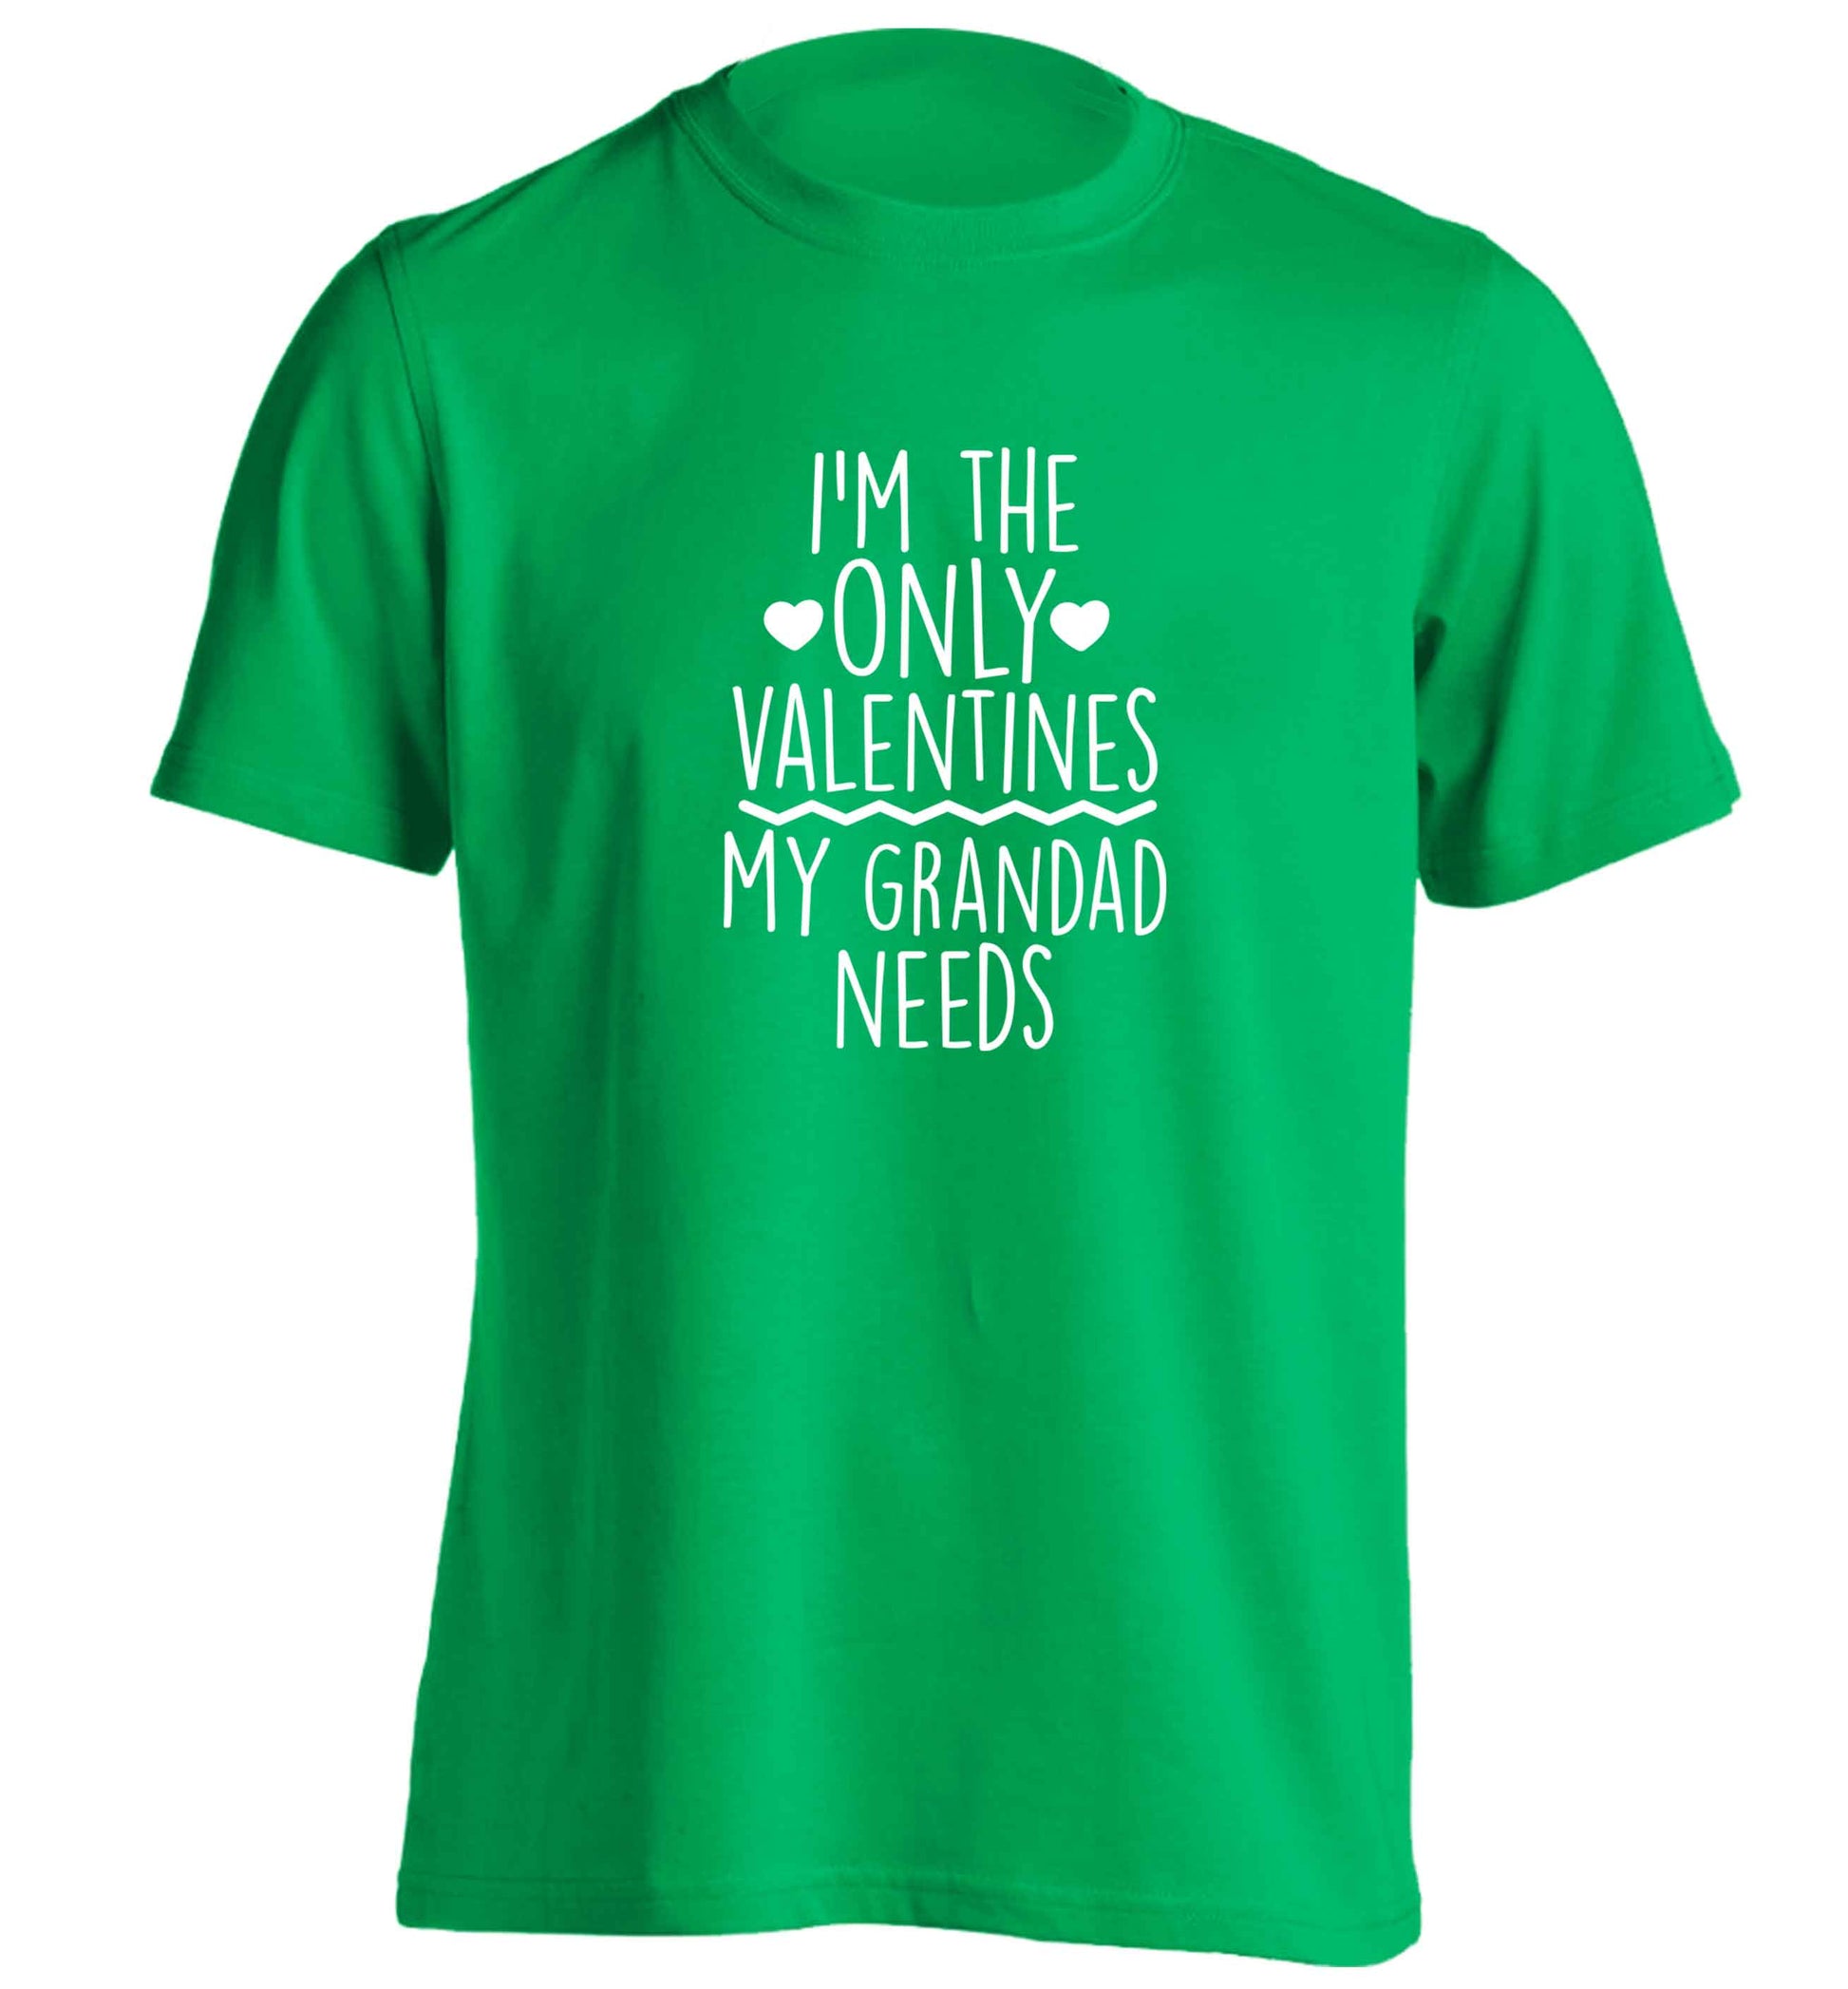 I'm the only valentines my grandad needs adults unisex green Tshirt 2XL